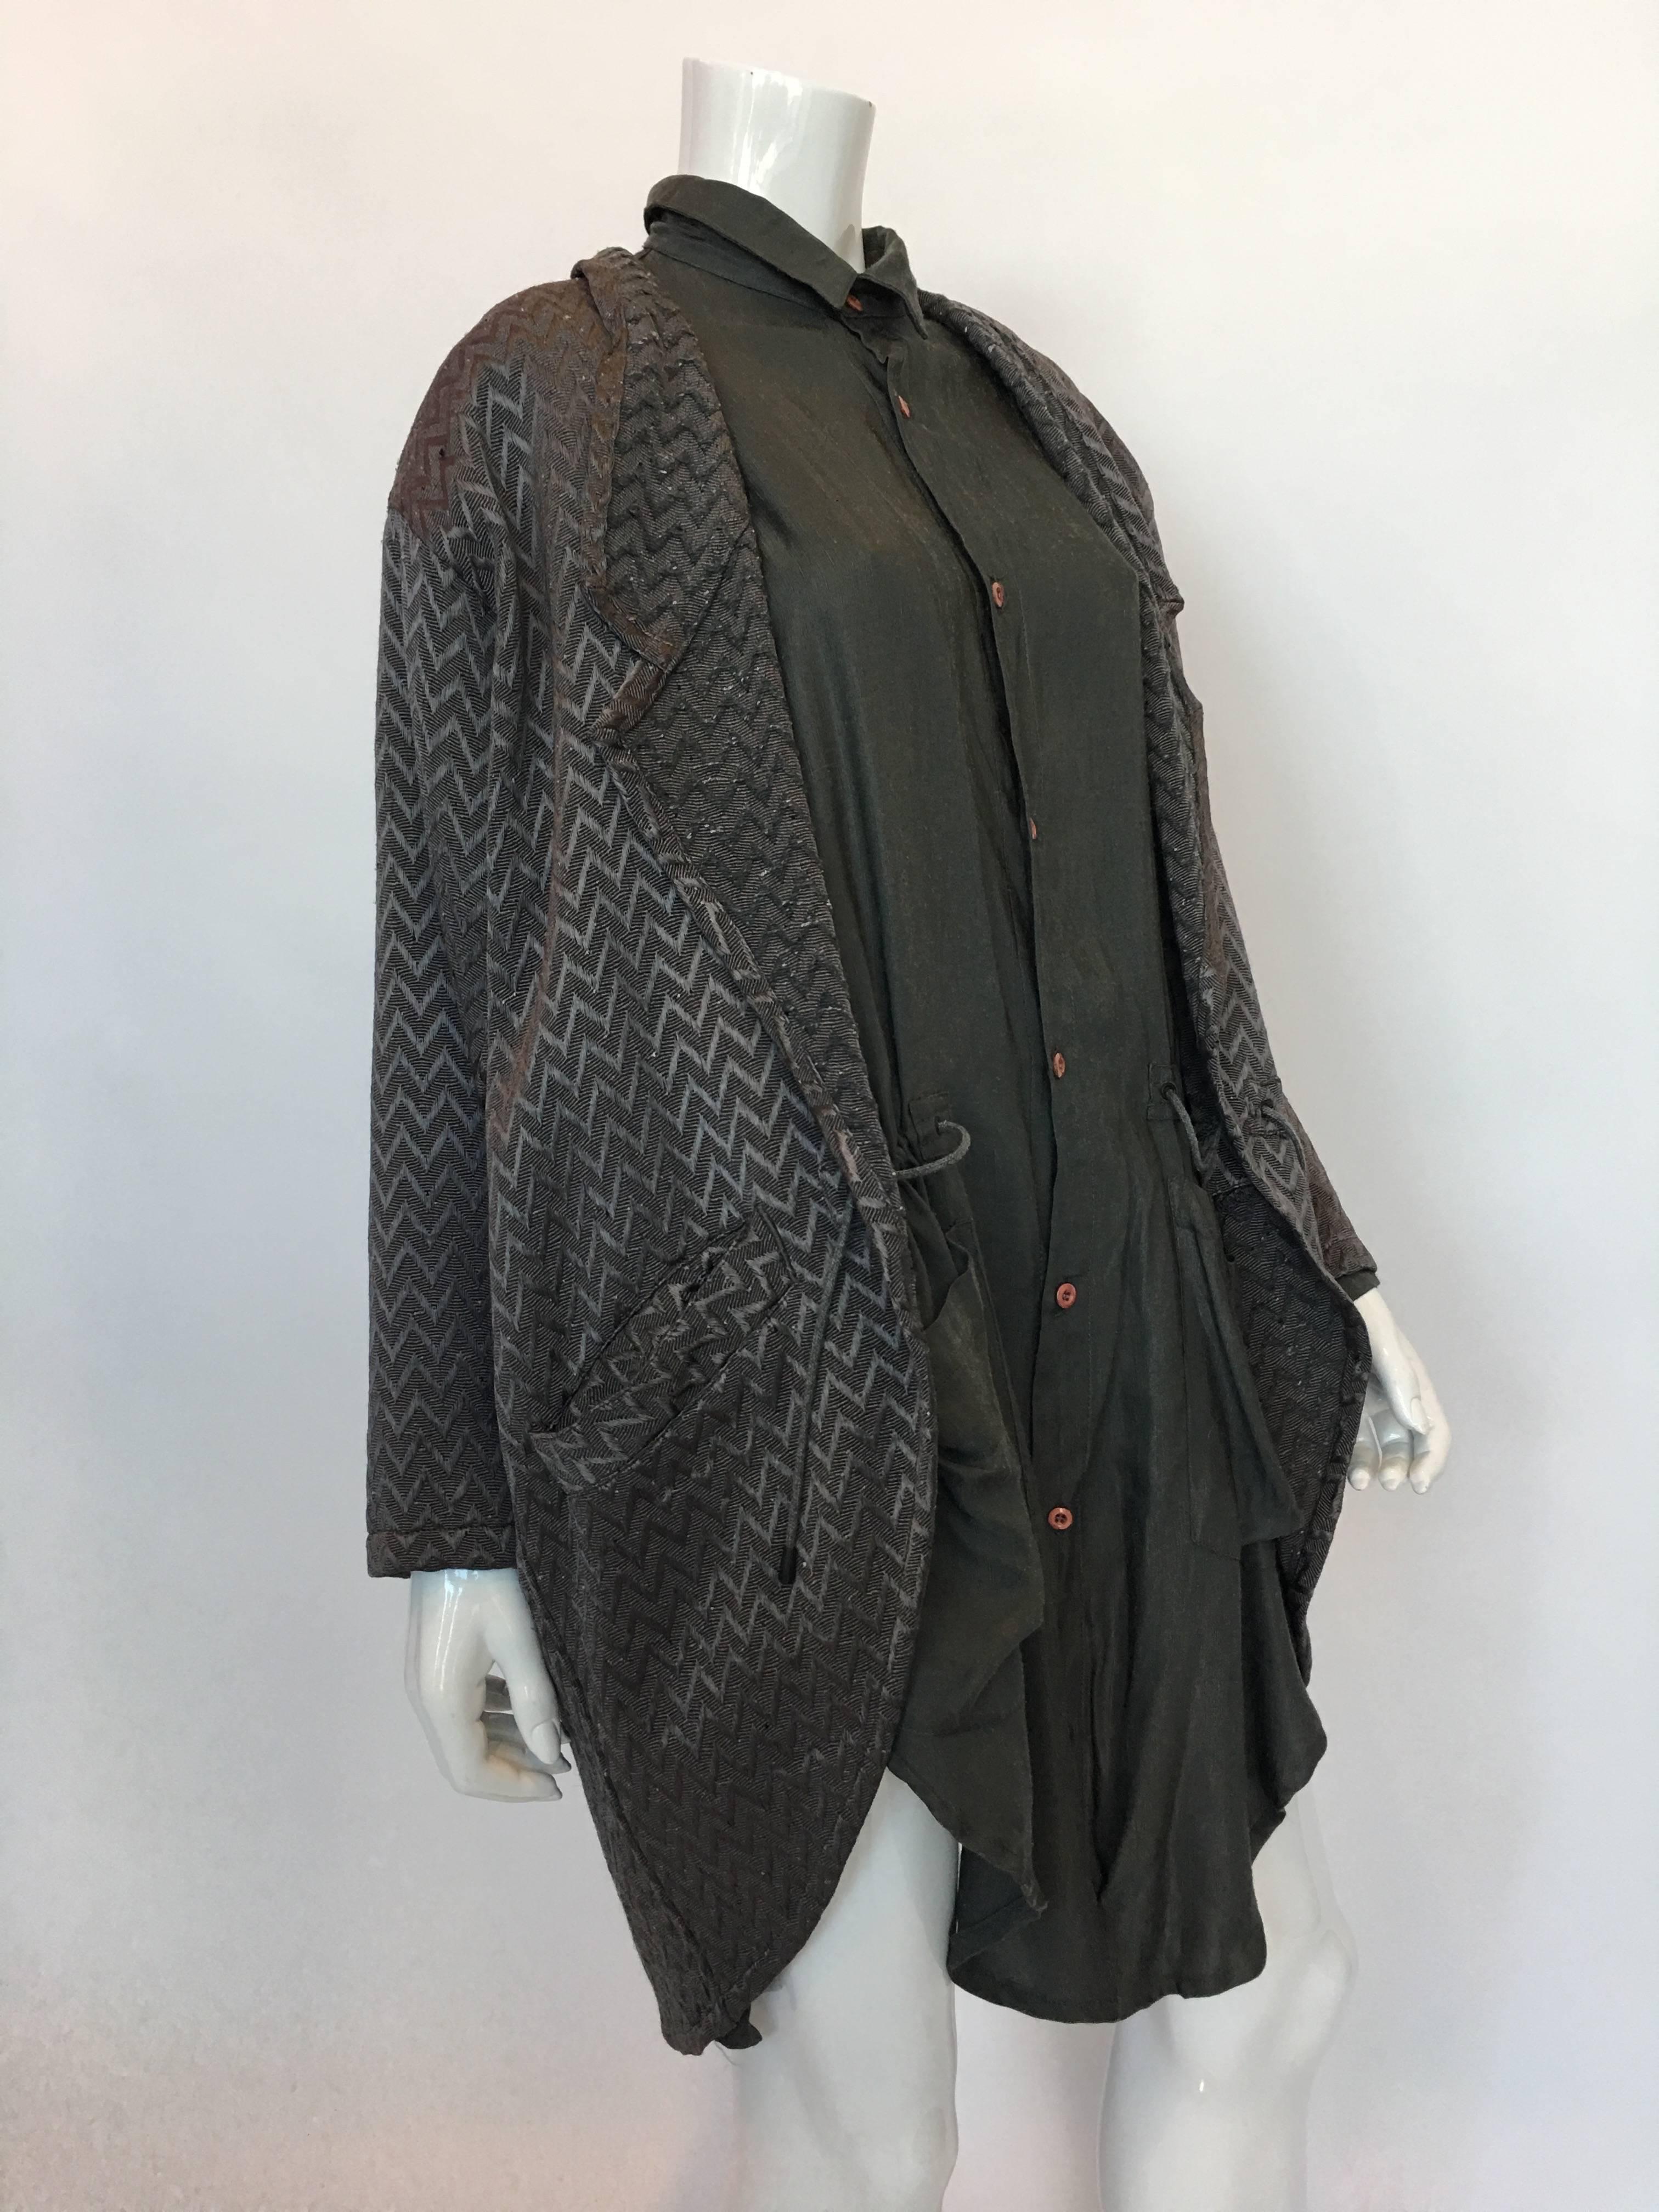 1980s Marithe + Francois Girbaud Oversized Grey Jacquard Jacket & Shirt Set w/ Drawstring


Made in Spain
Size label: S
*Jacket and shirt are separate pieces but stay attached via drawstring
*Jacket has shoulder pads

Measurements (taken